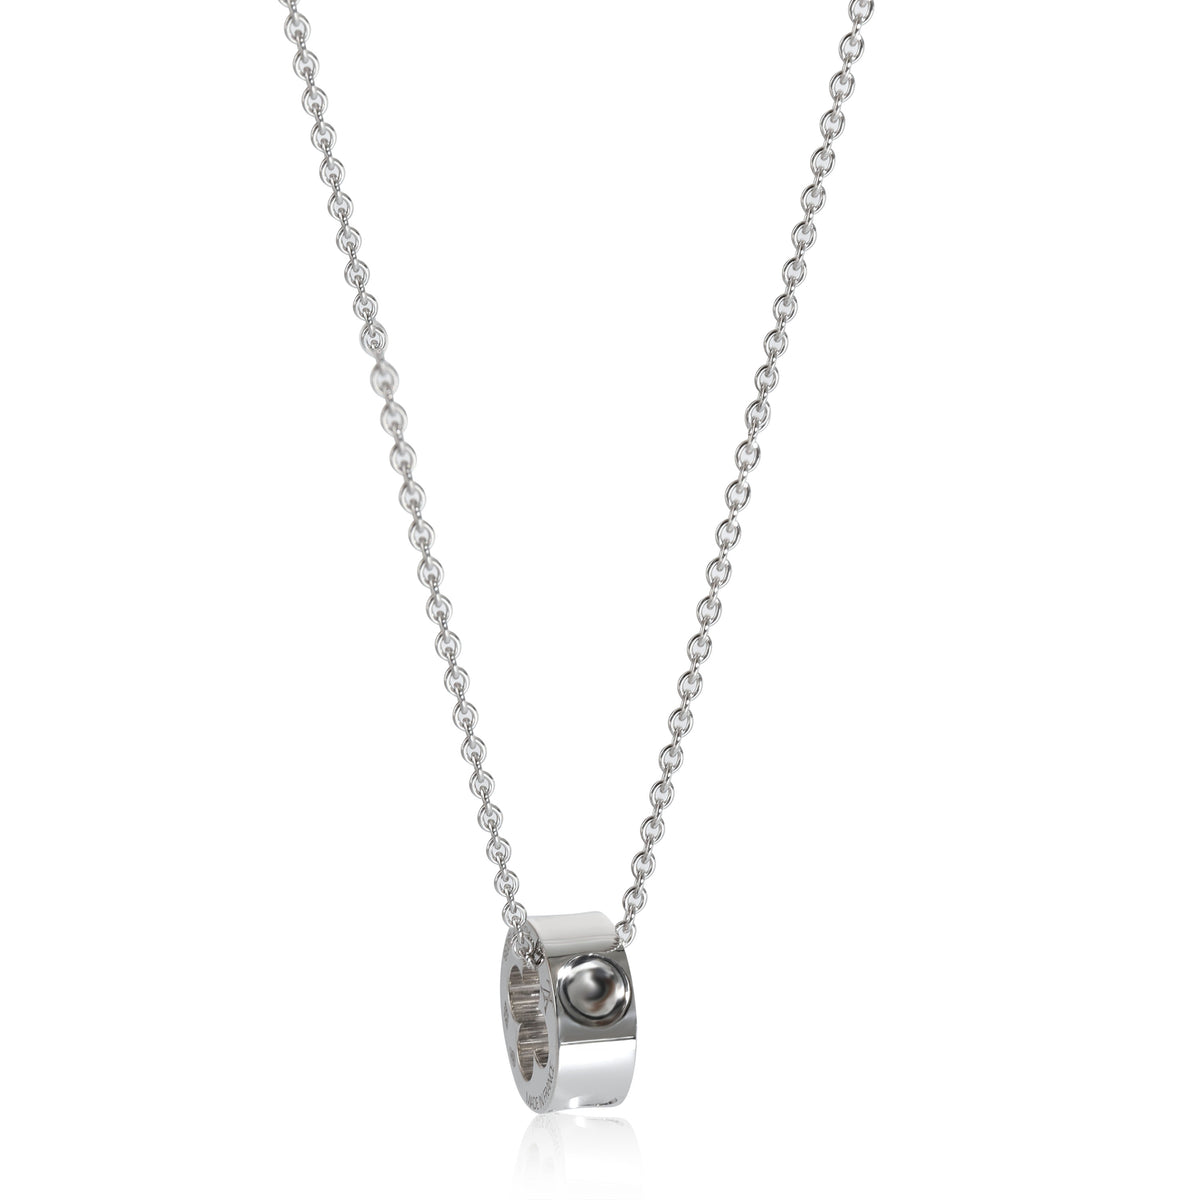 Idylle Blossom Pendant, White Gold And Diamonds - Categories